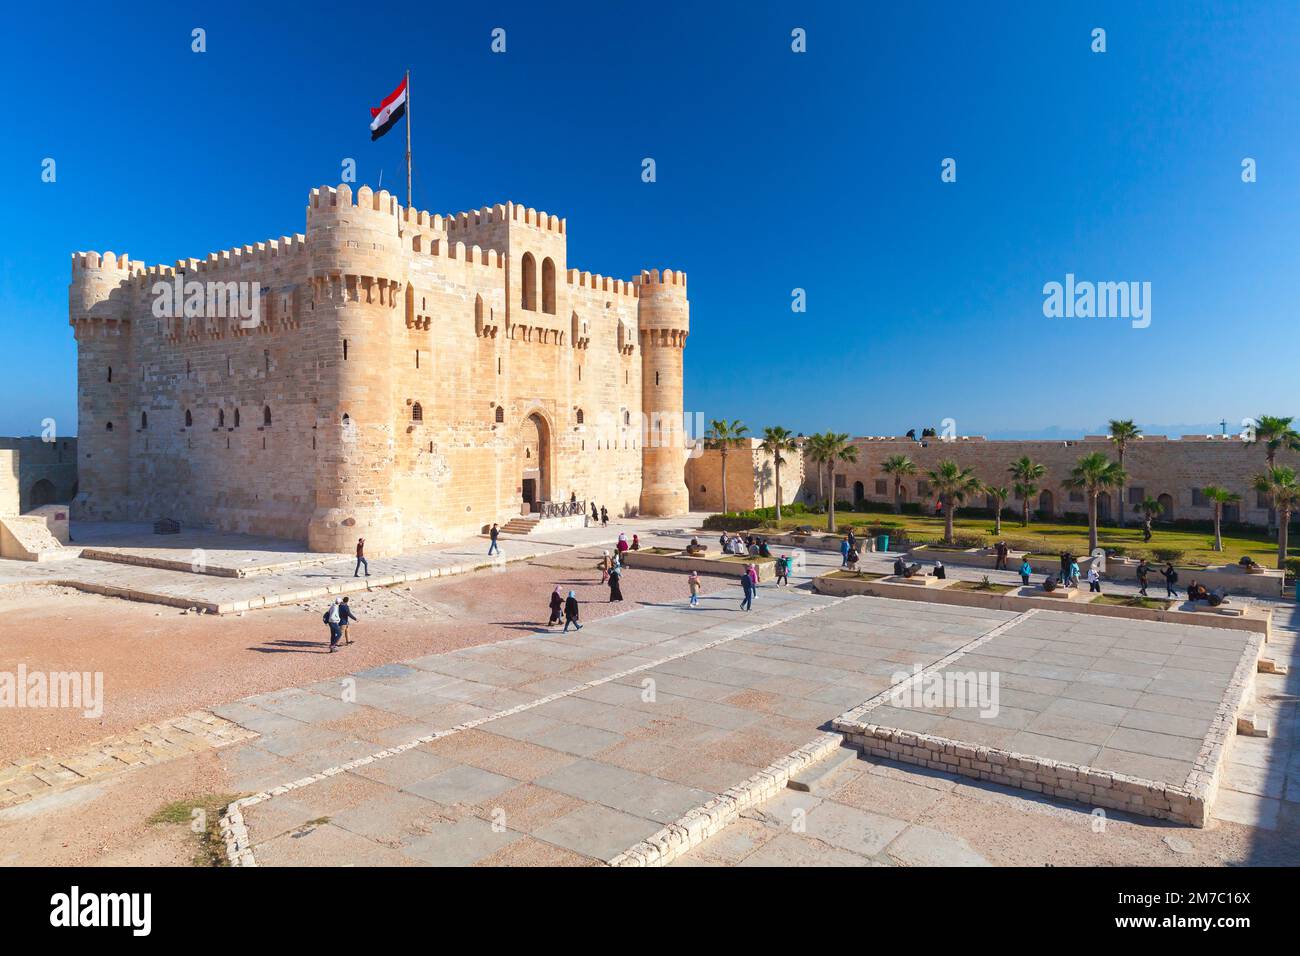 The Citadel of Qaitbay or the Fort of Qaitbay on a sunny day. It is a 15th-century defensive fortress located on the Mediterranean sea coast, Alexandr Stock Photo